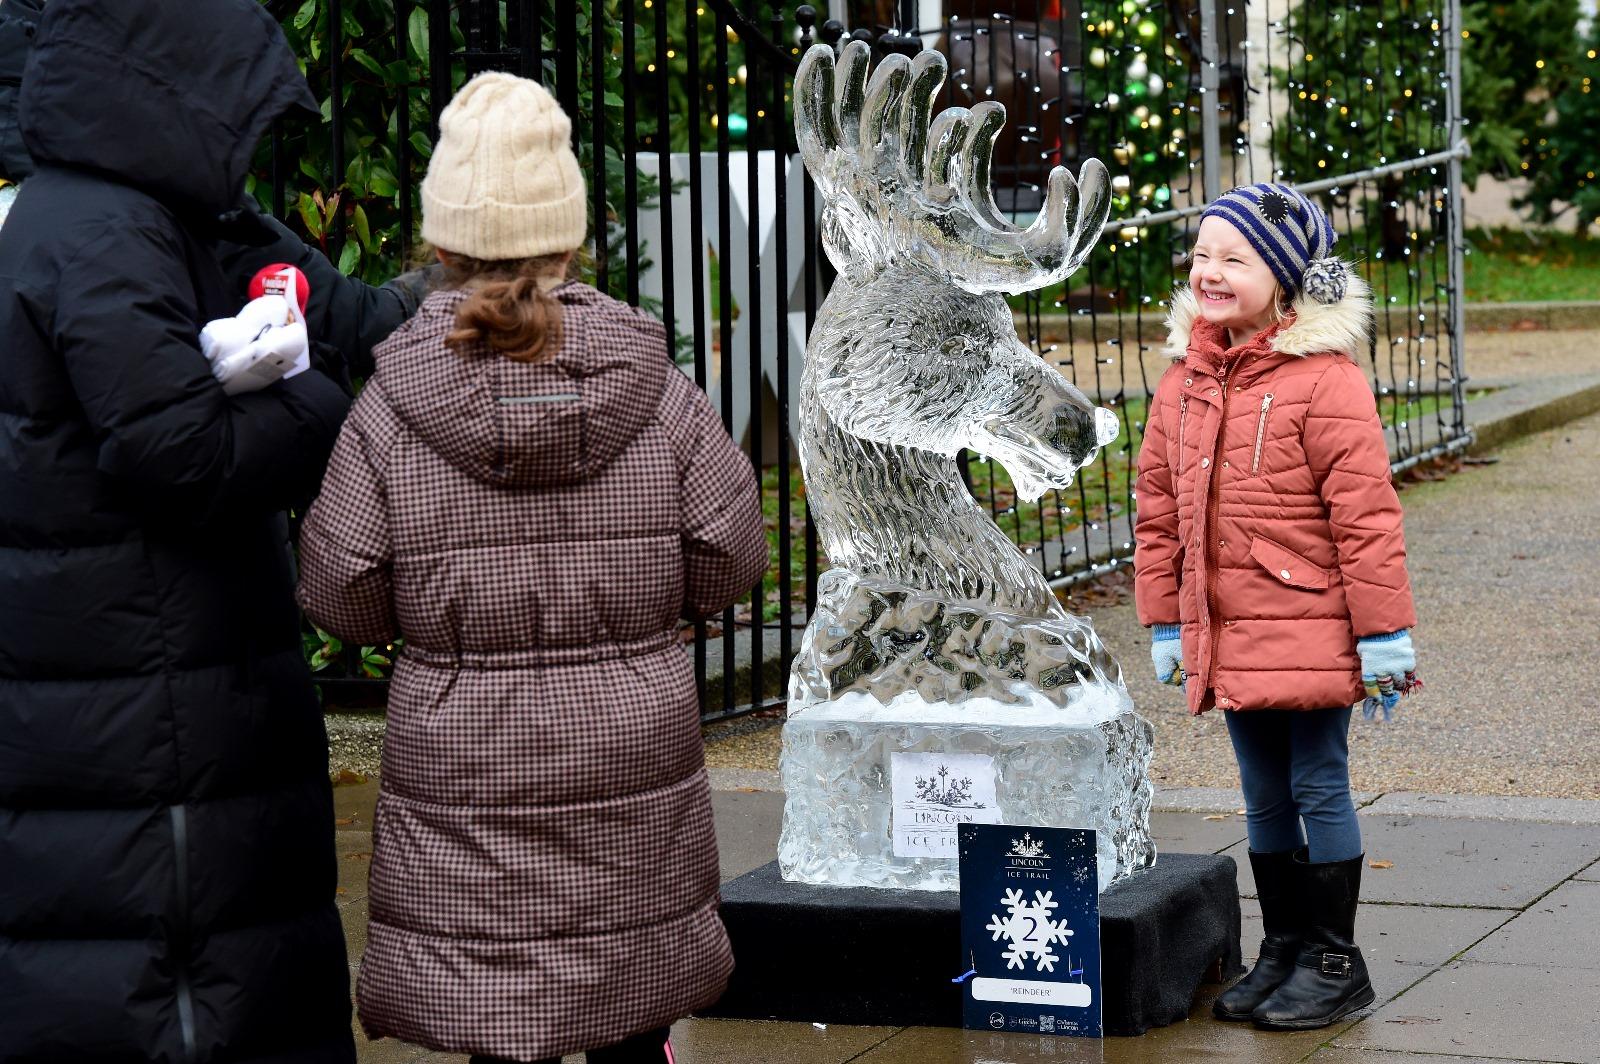 A child looking at an ice sculpture of a reindeer.